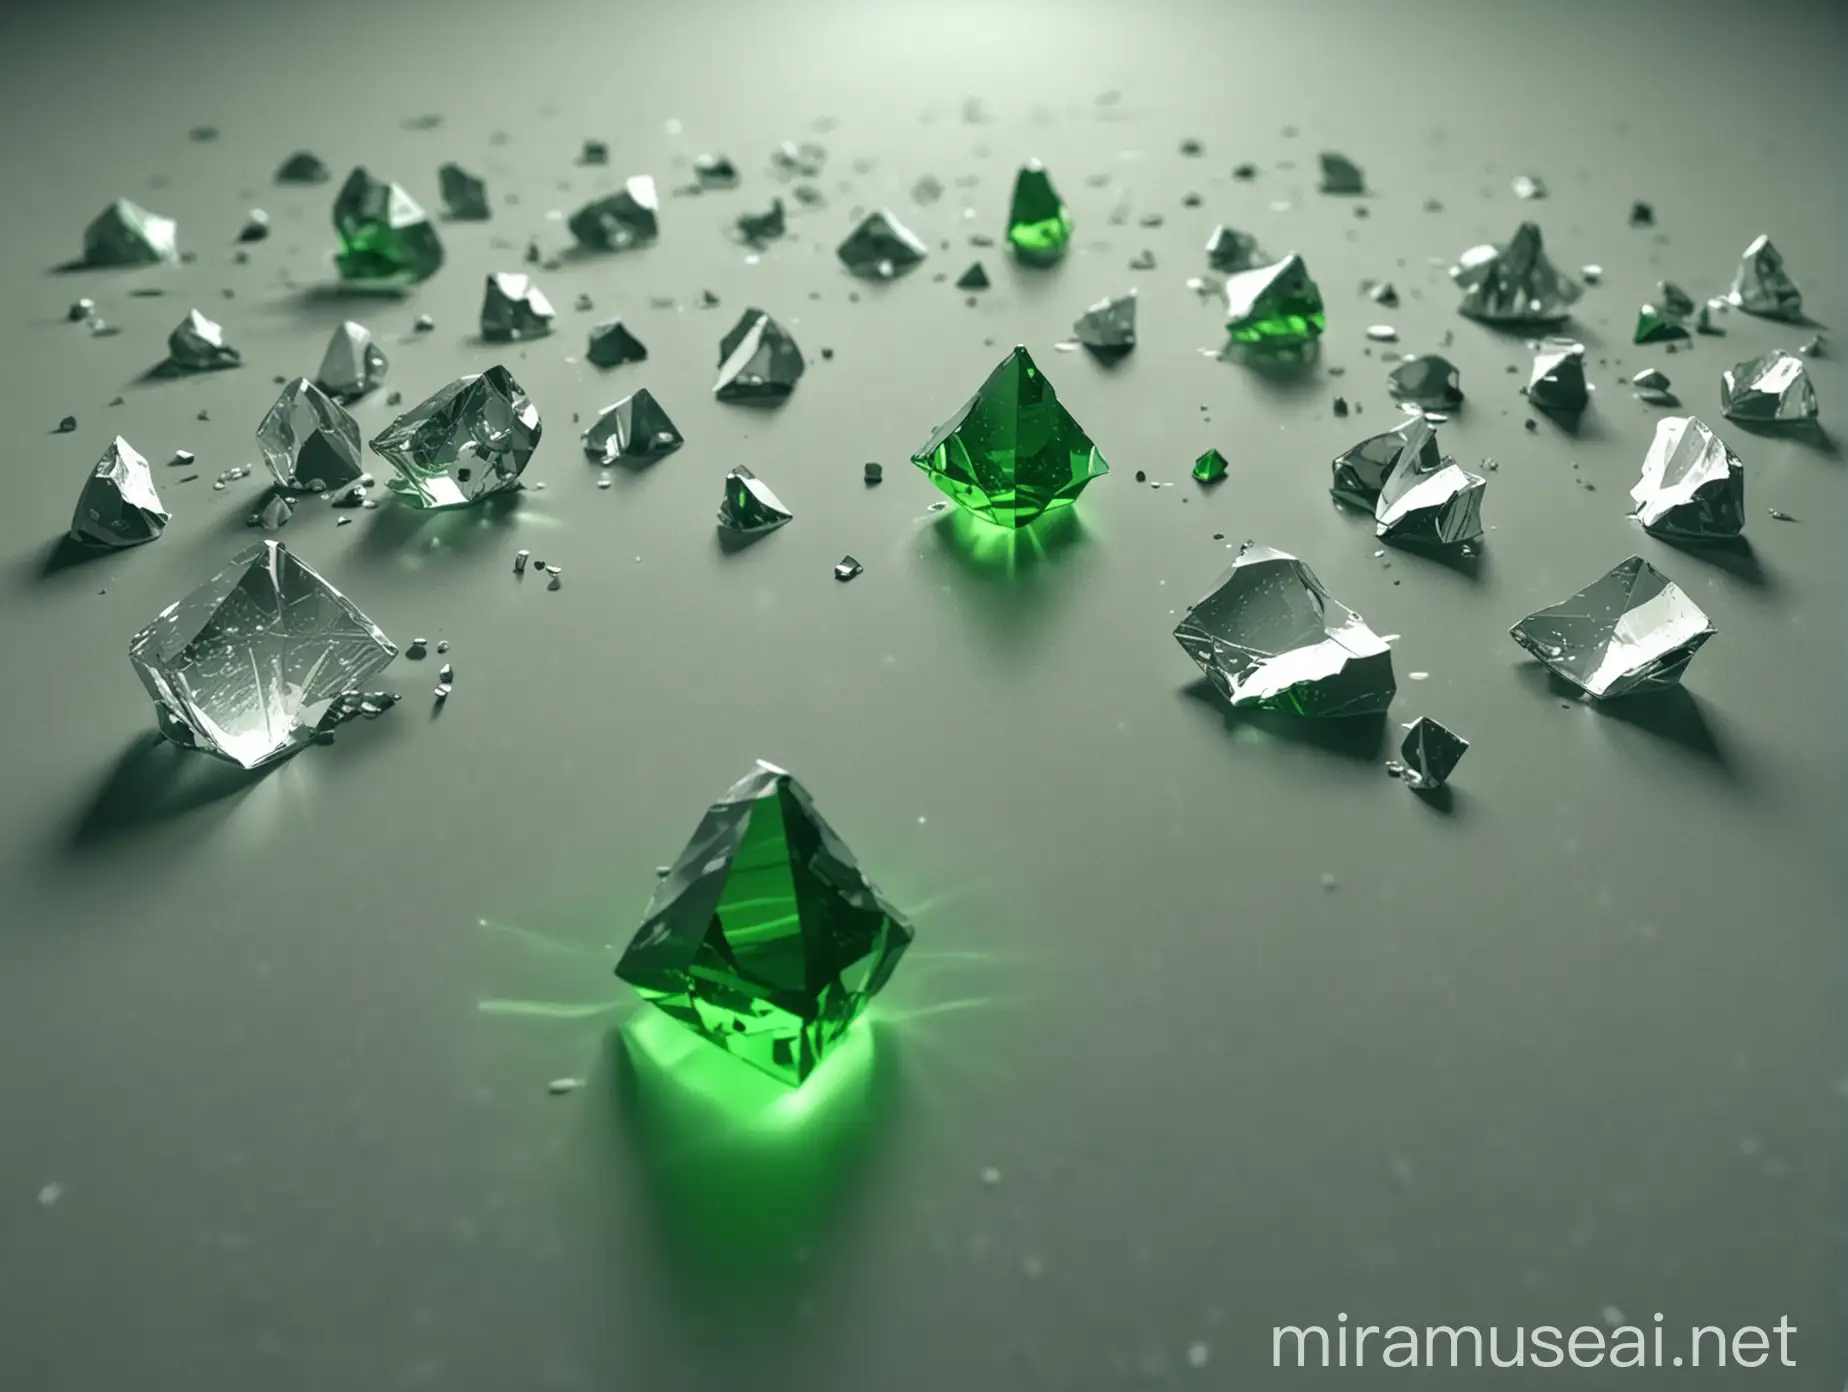 Abstract Scientific Sketch Diverse Crystals Illuminated by Green Beam